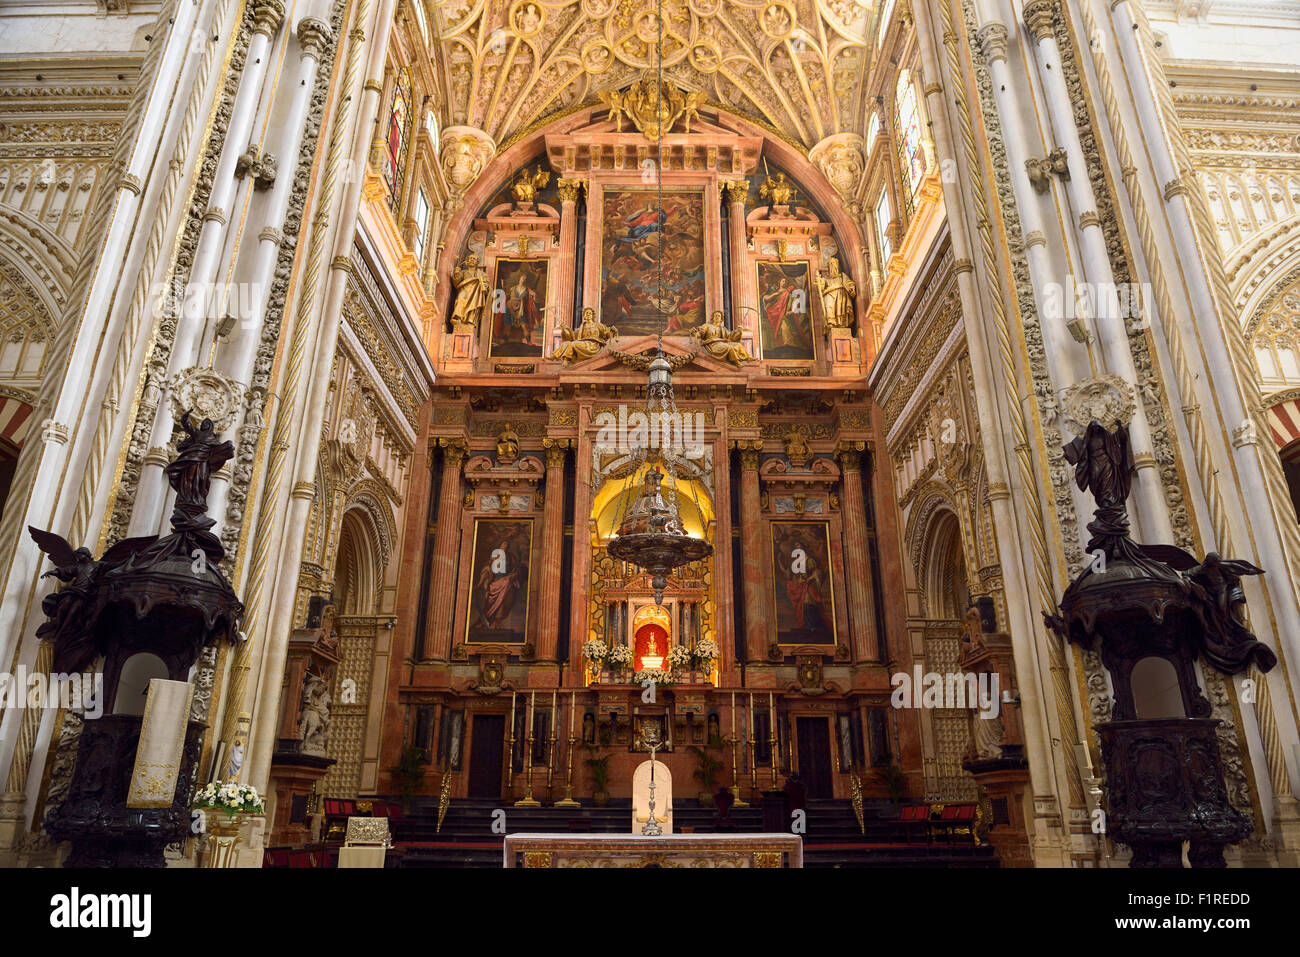 High main altar with carved wood lecterns of the Cordoba Our Lady of the Assumption Cathedral Mosque Stock Photo